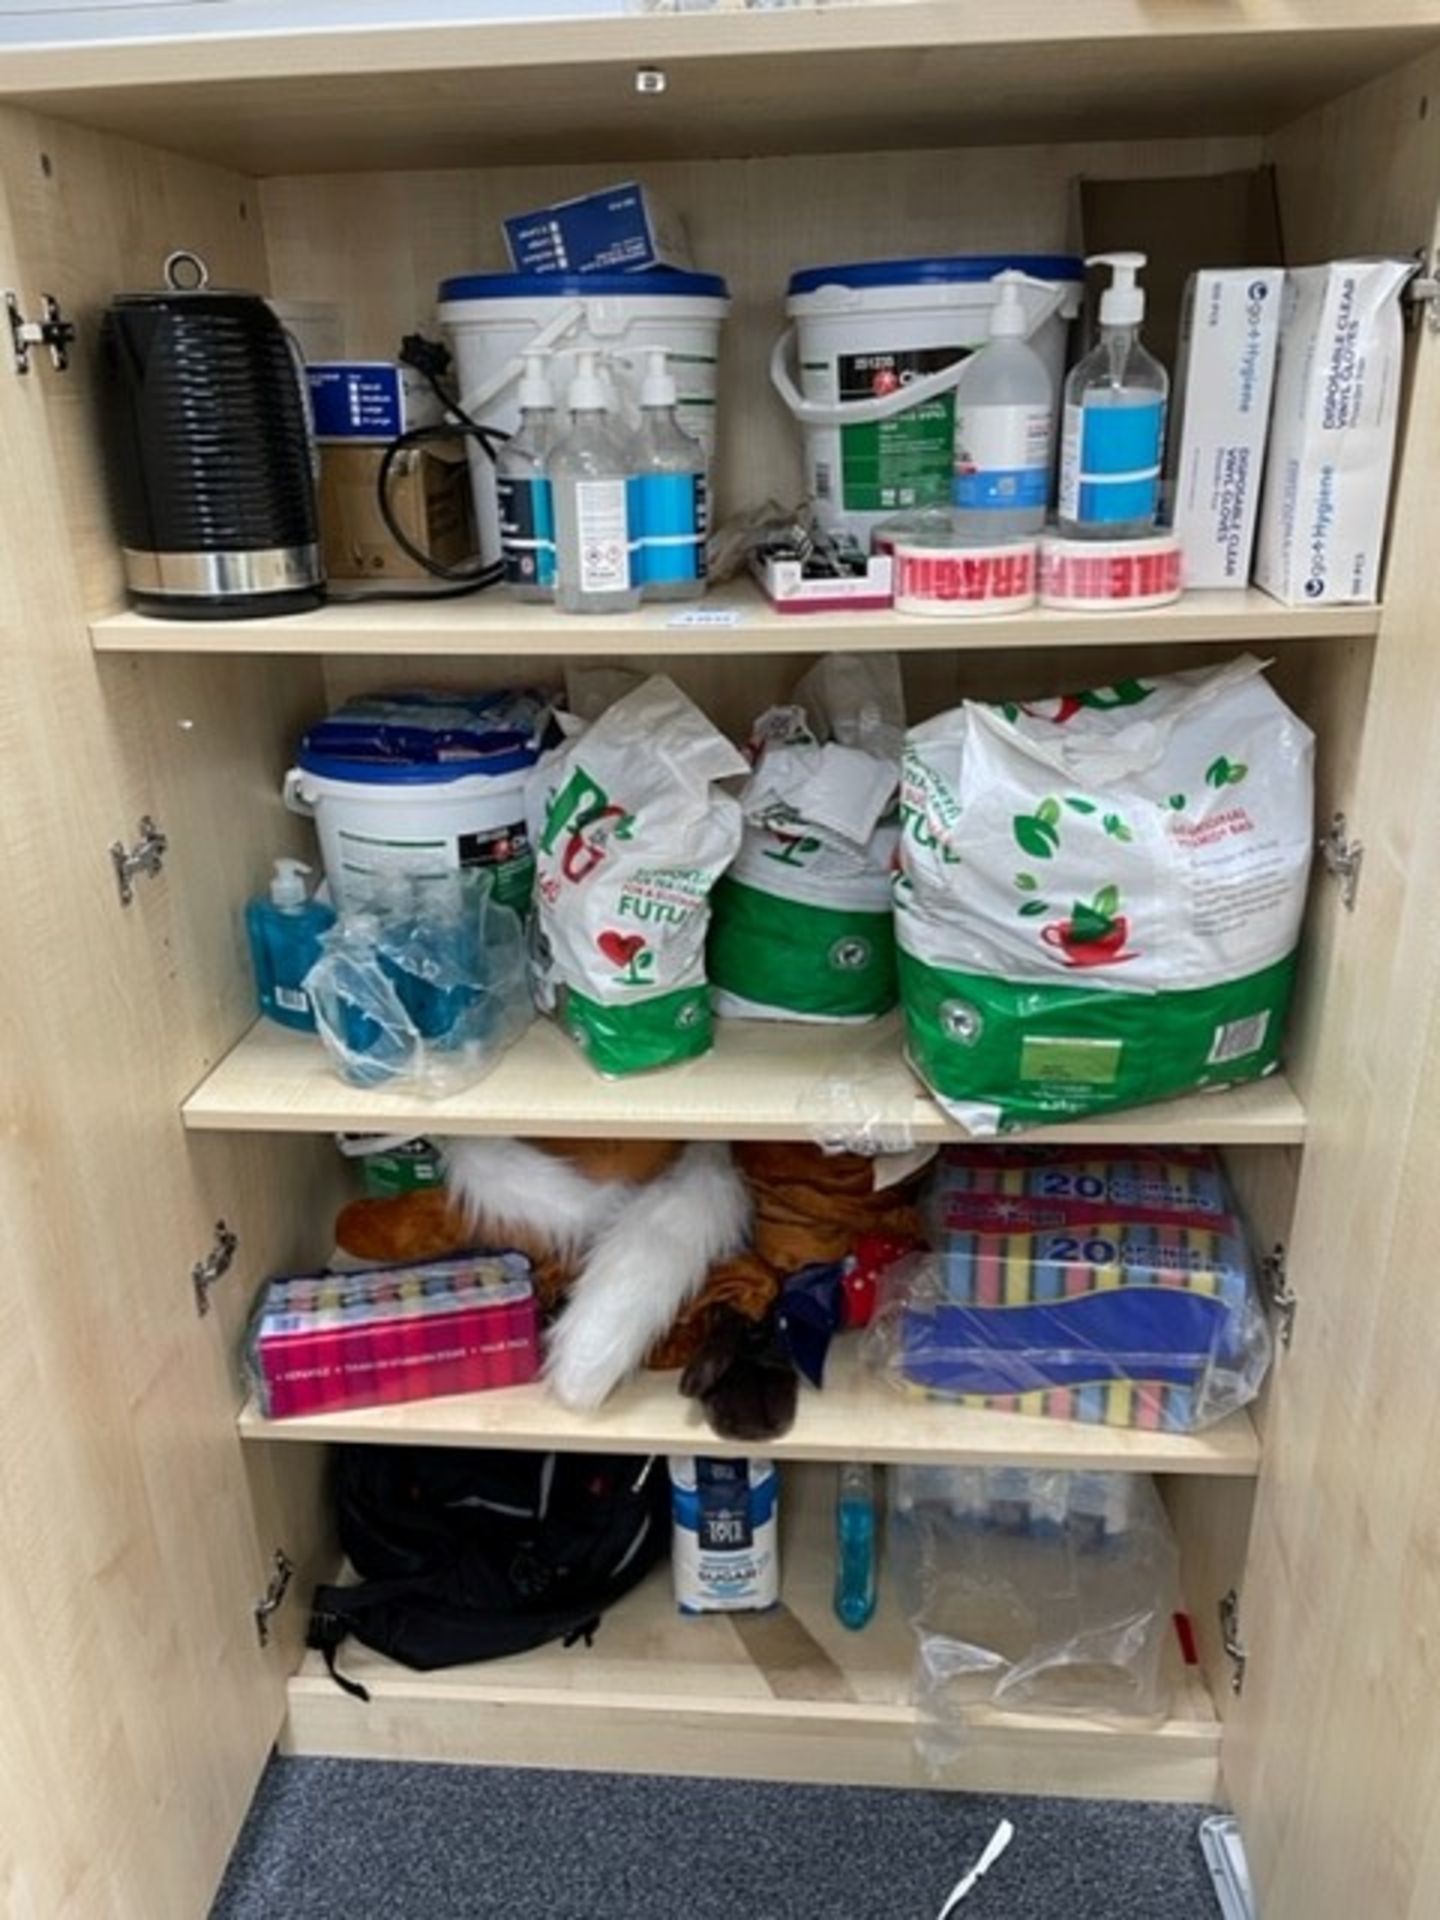 Contents of Cupboard To Include Tea, Surface Wipes, Sugar etc (Location: Westminster. Please Refer